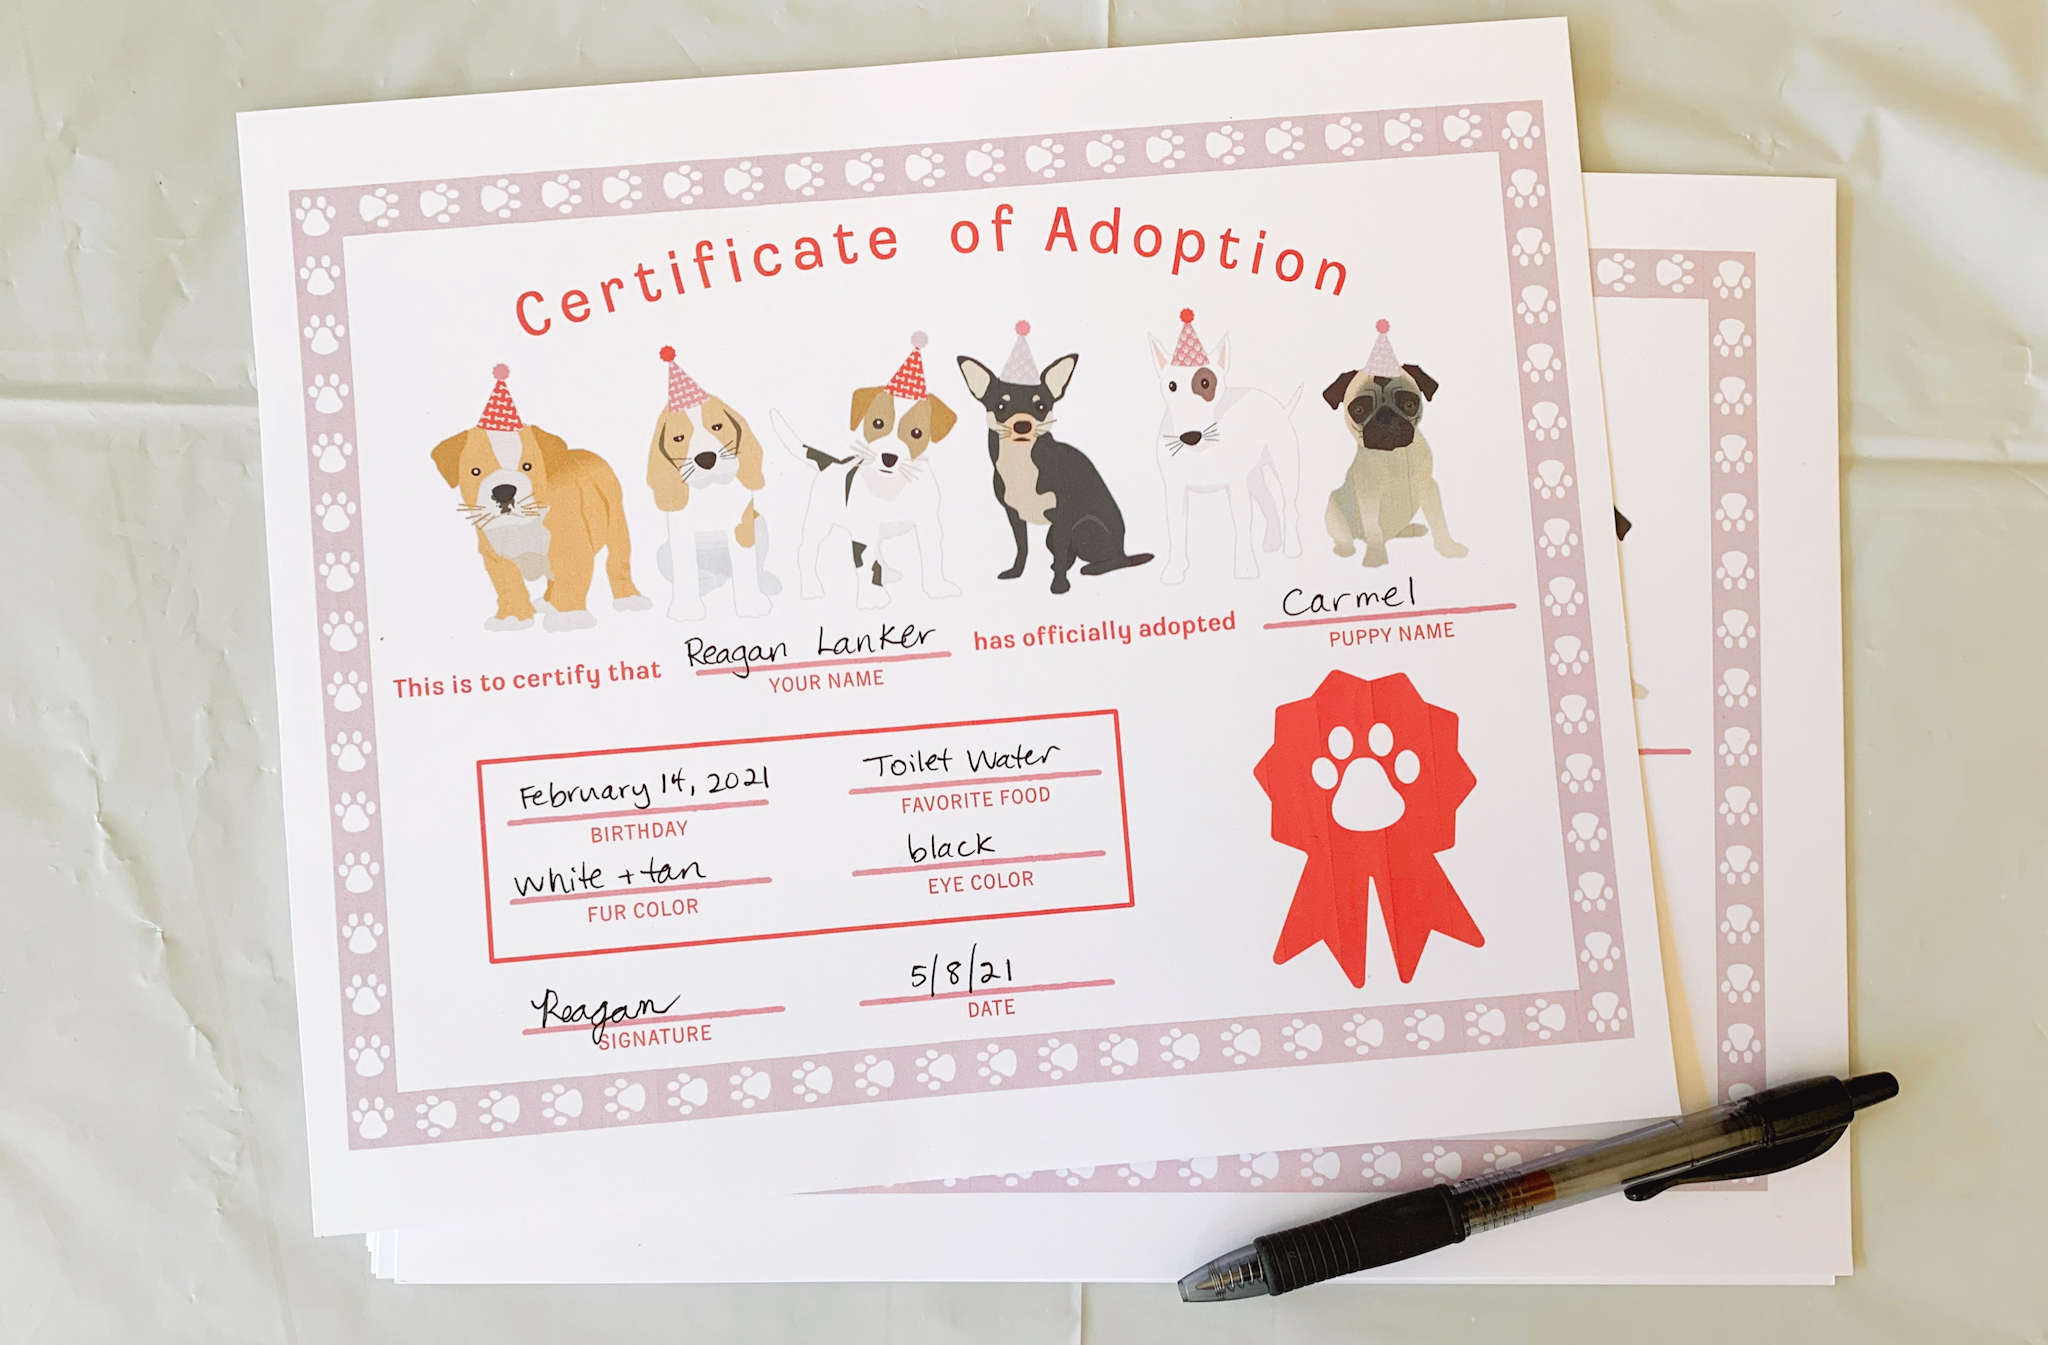 Pepper's 2nd Birthday "Puppy Paw-ty!" Creative party ideas via thinkingcloset.com - How to host a puppy-themed pawty with an adopt a puppy activity fun for all ages! The last step was to sign their adoption certificate!